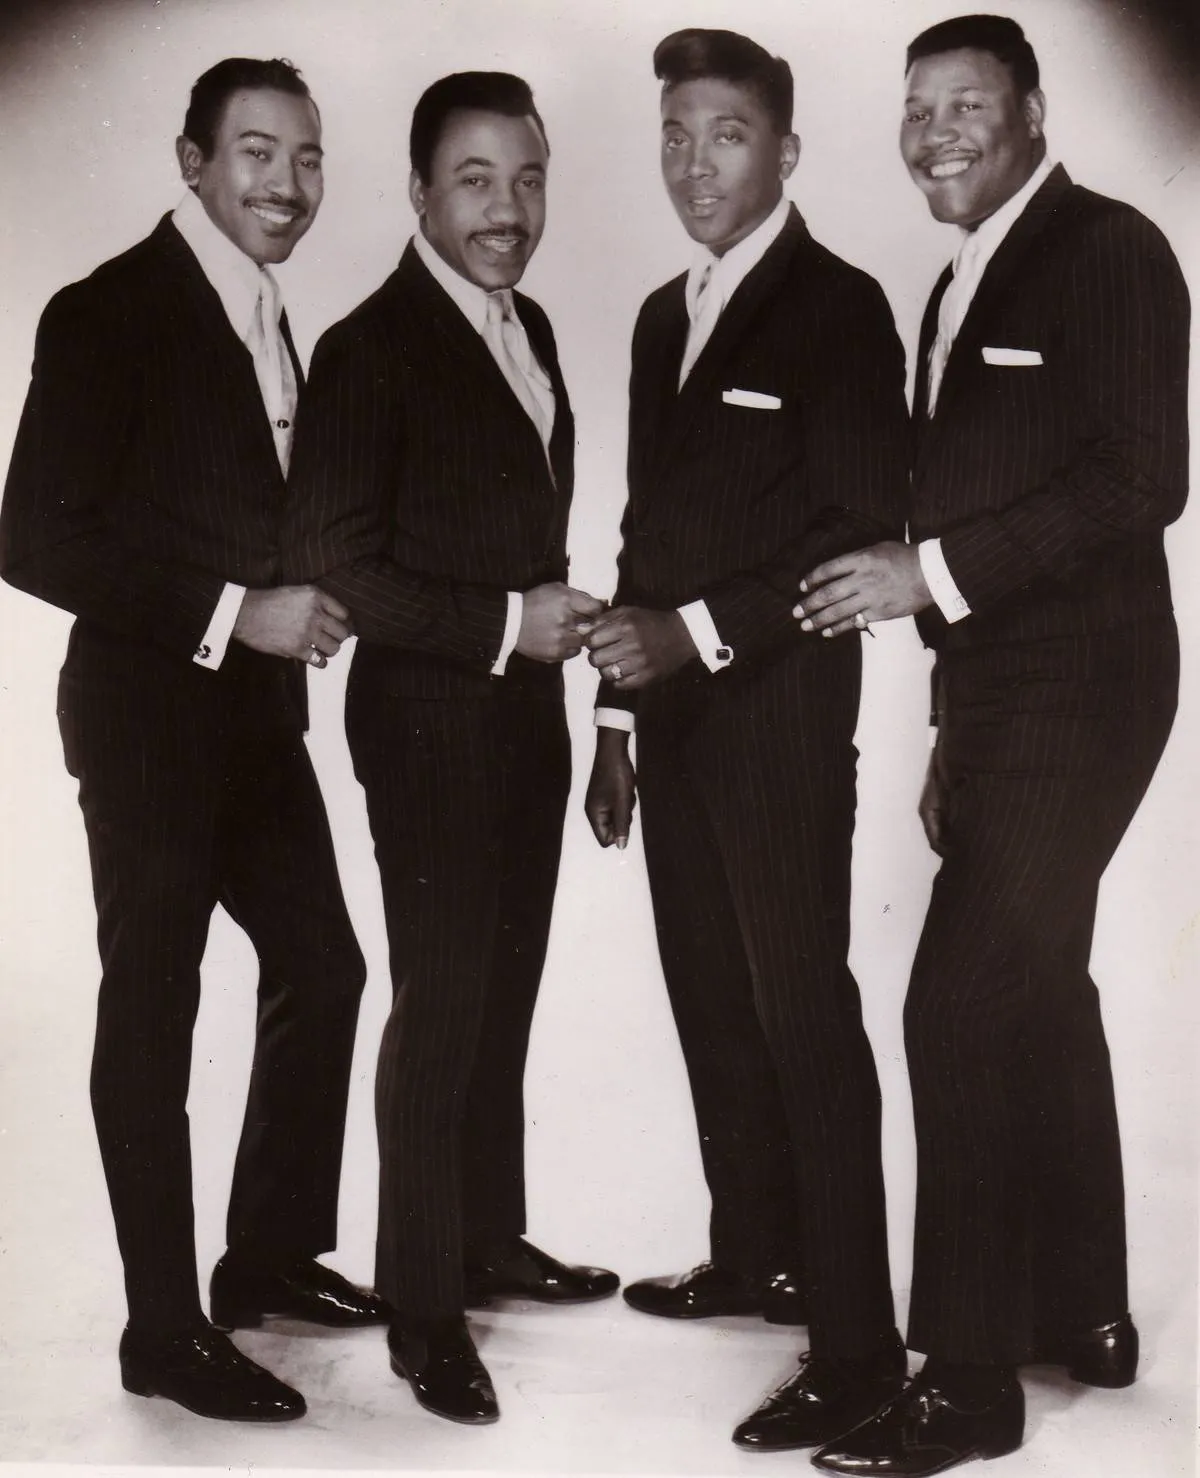 Maurice Williams And The Zodiacs pose for a studio group portrait in 1960 in the United States.